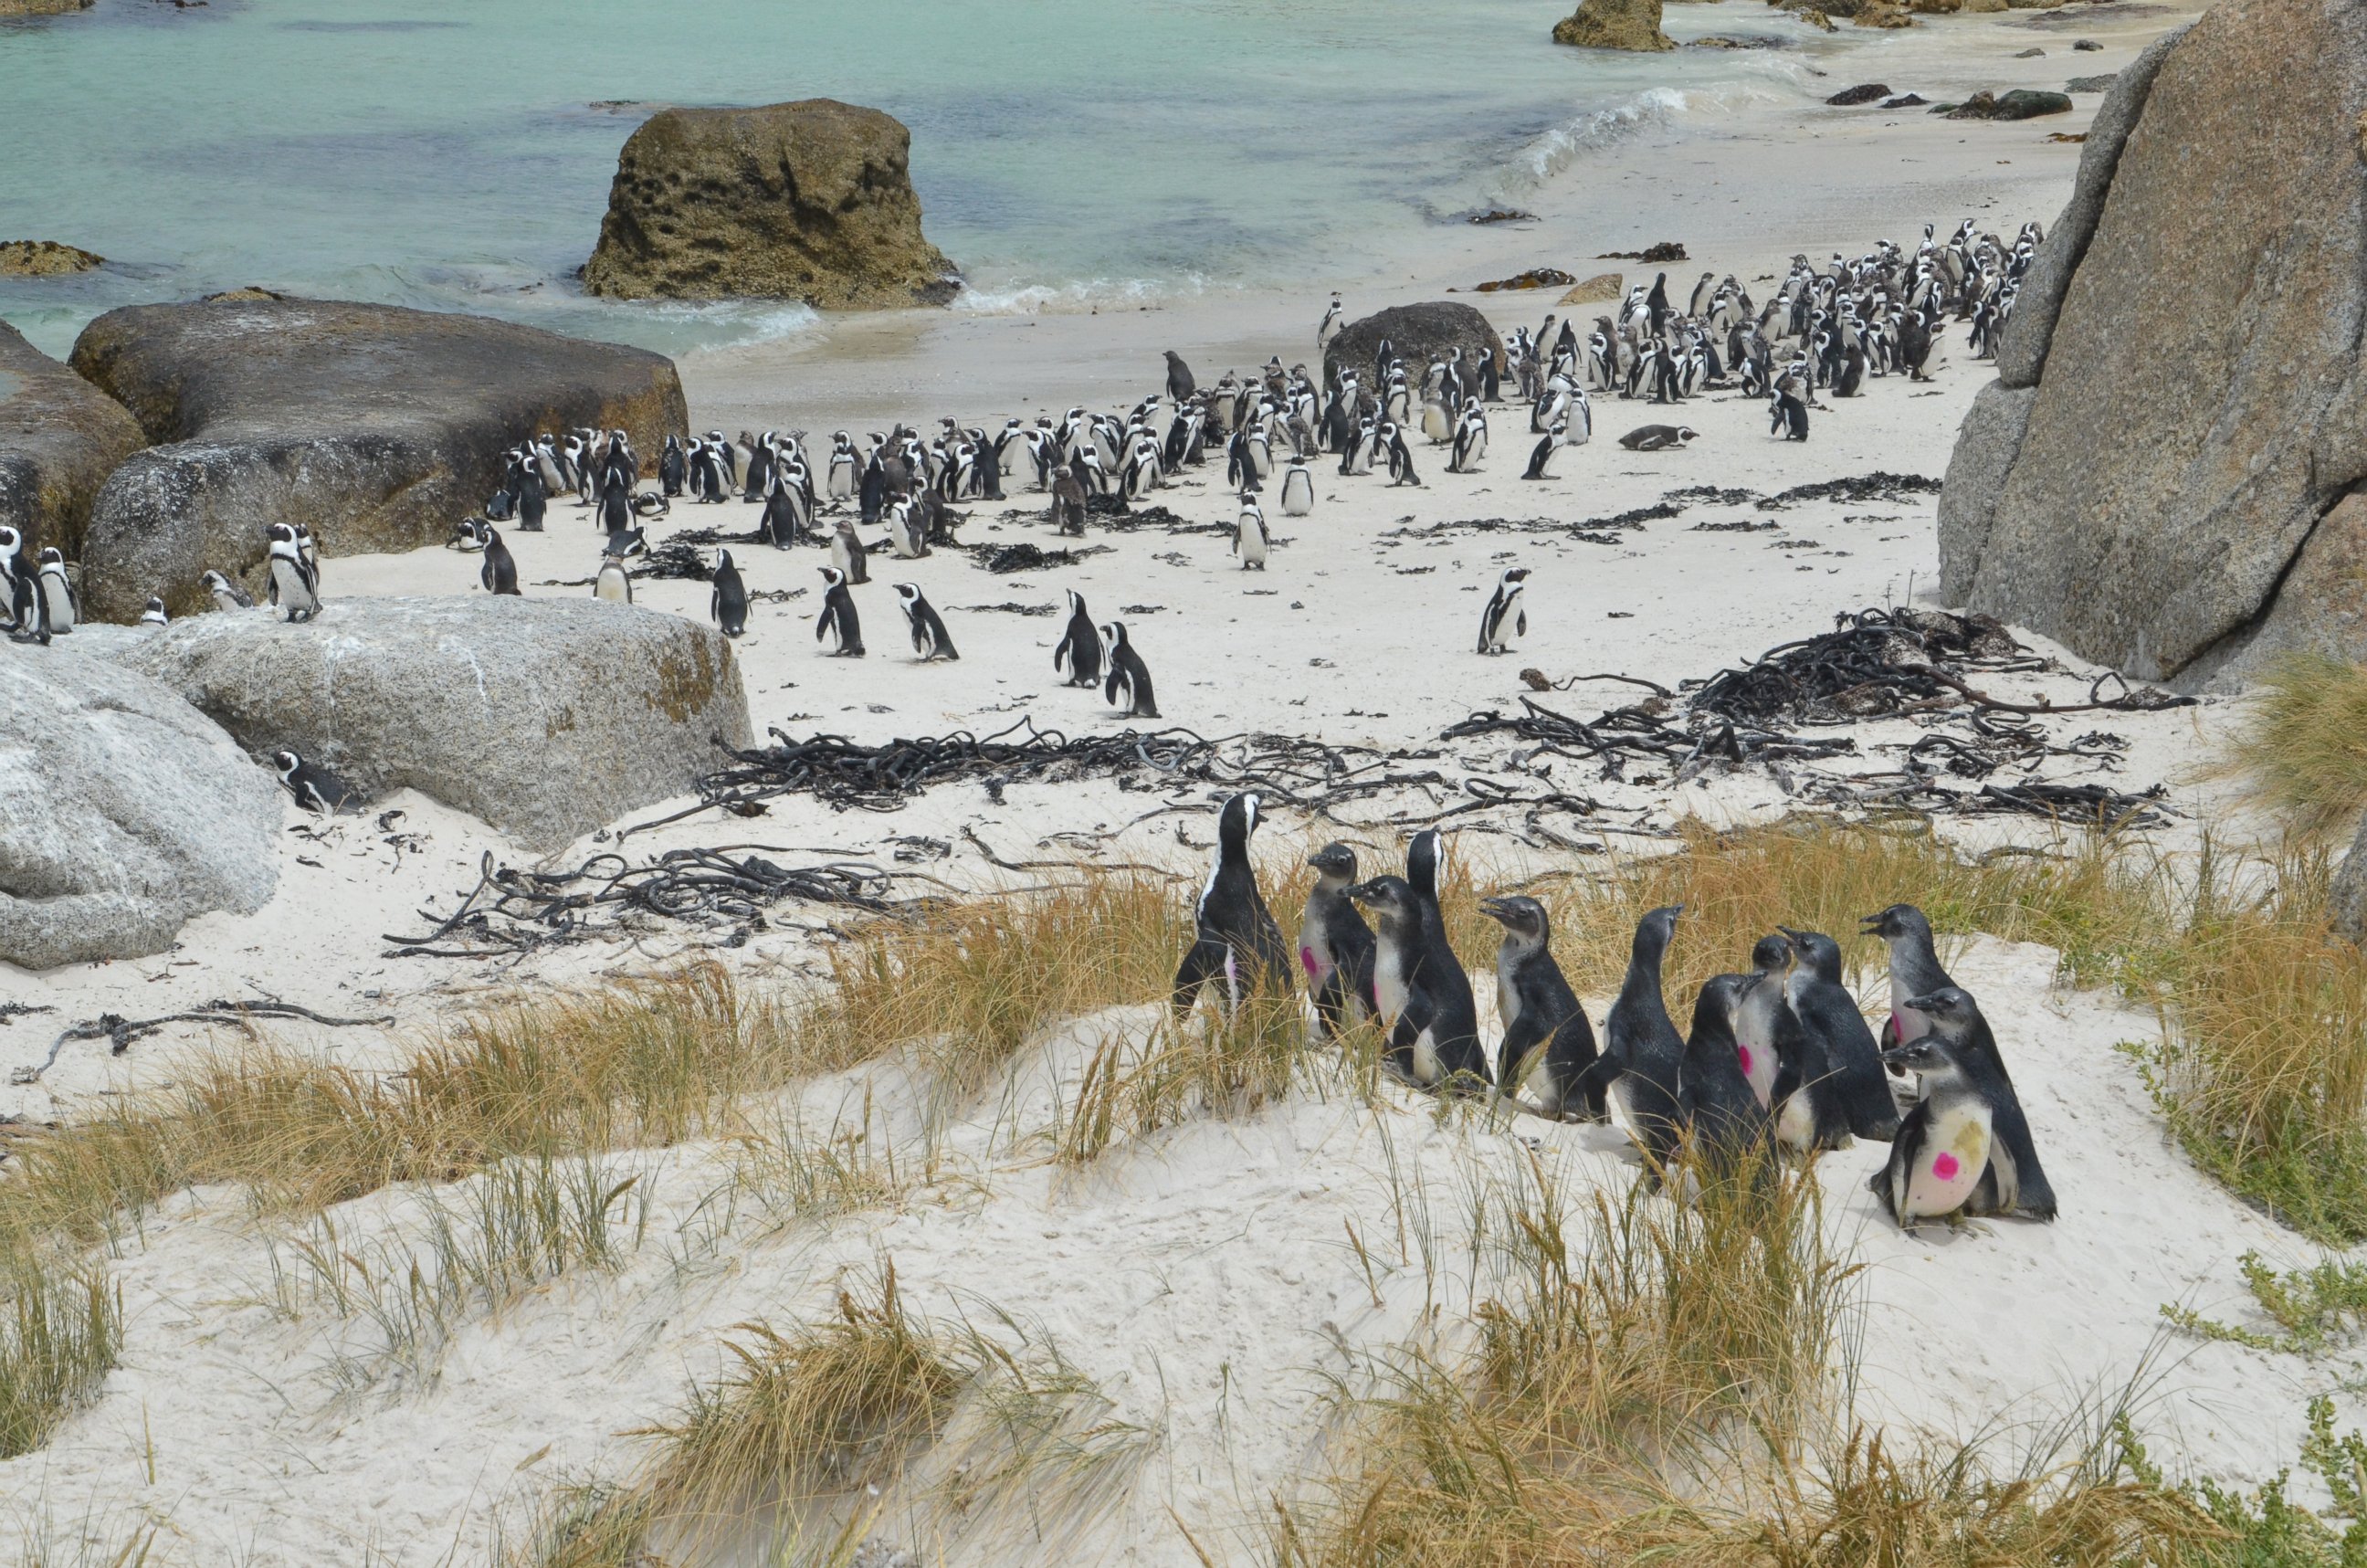 PHOTO: Throughout the months of December 2016 and January 2017, teams will be working together to admit, treat and release penguin chicks found stranded along the coast in South Africa. 